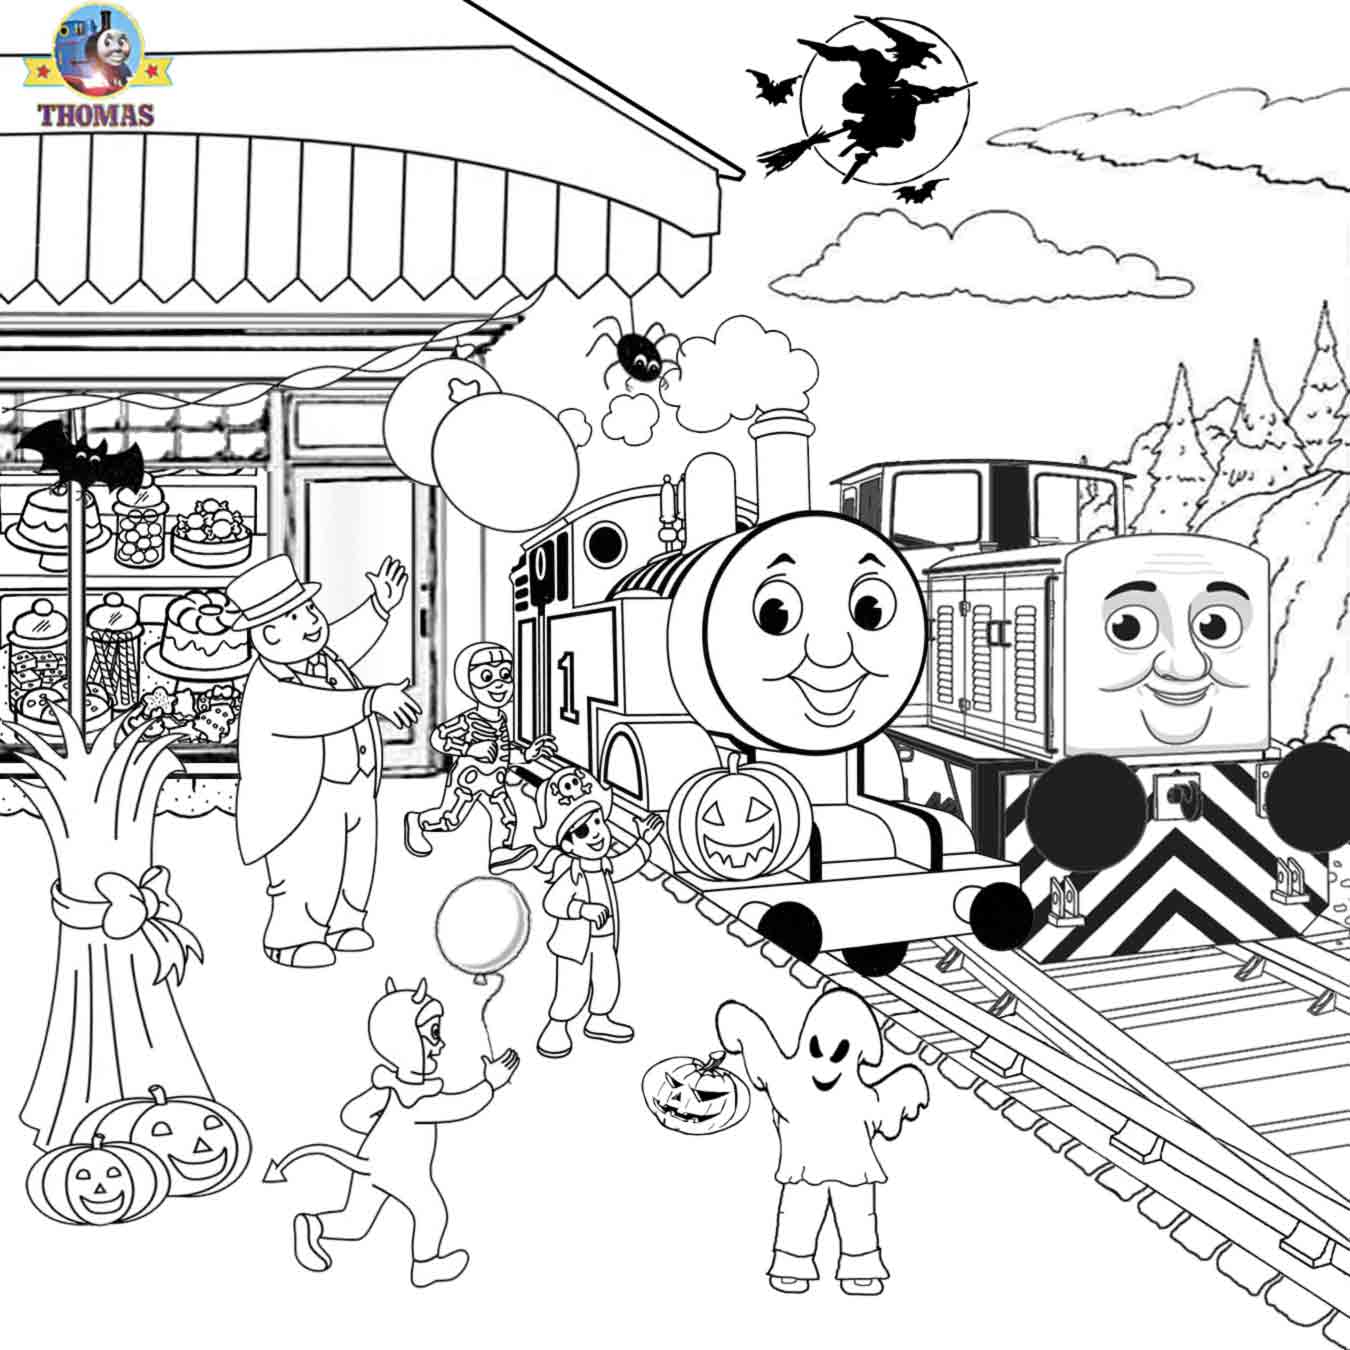 Halloween Coloring Pages Thomas The Train 5